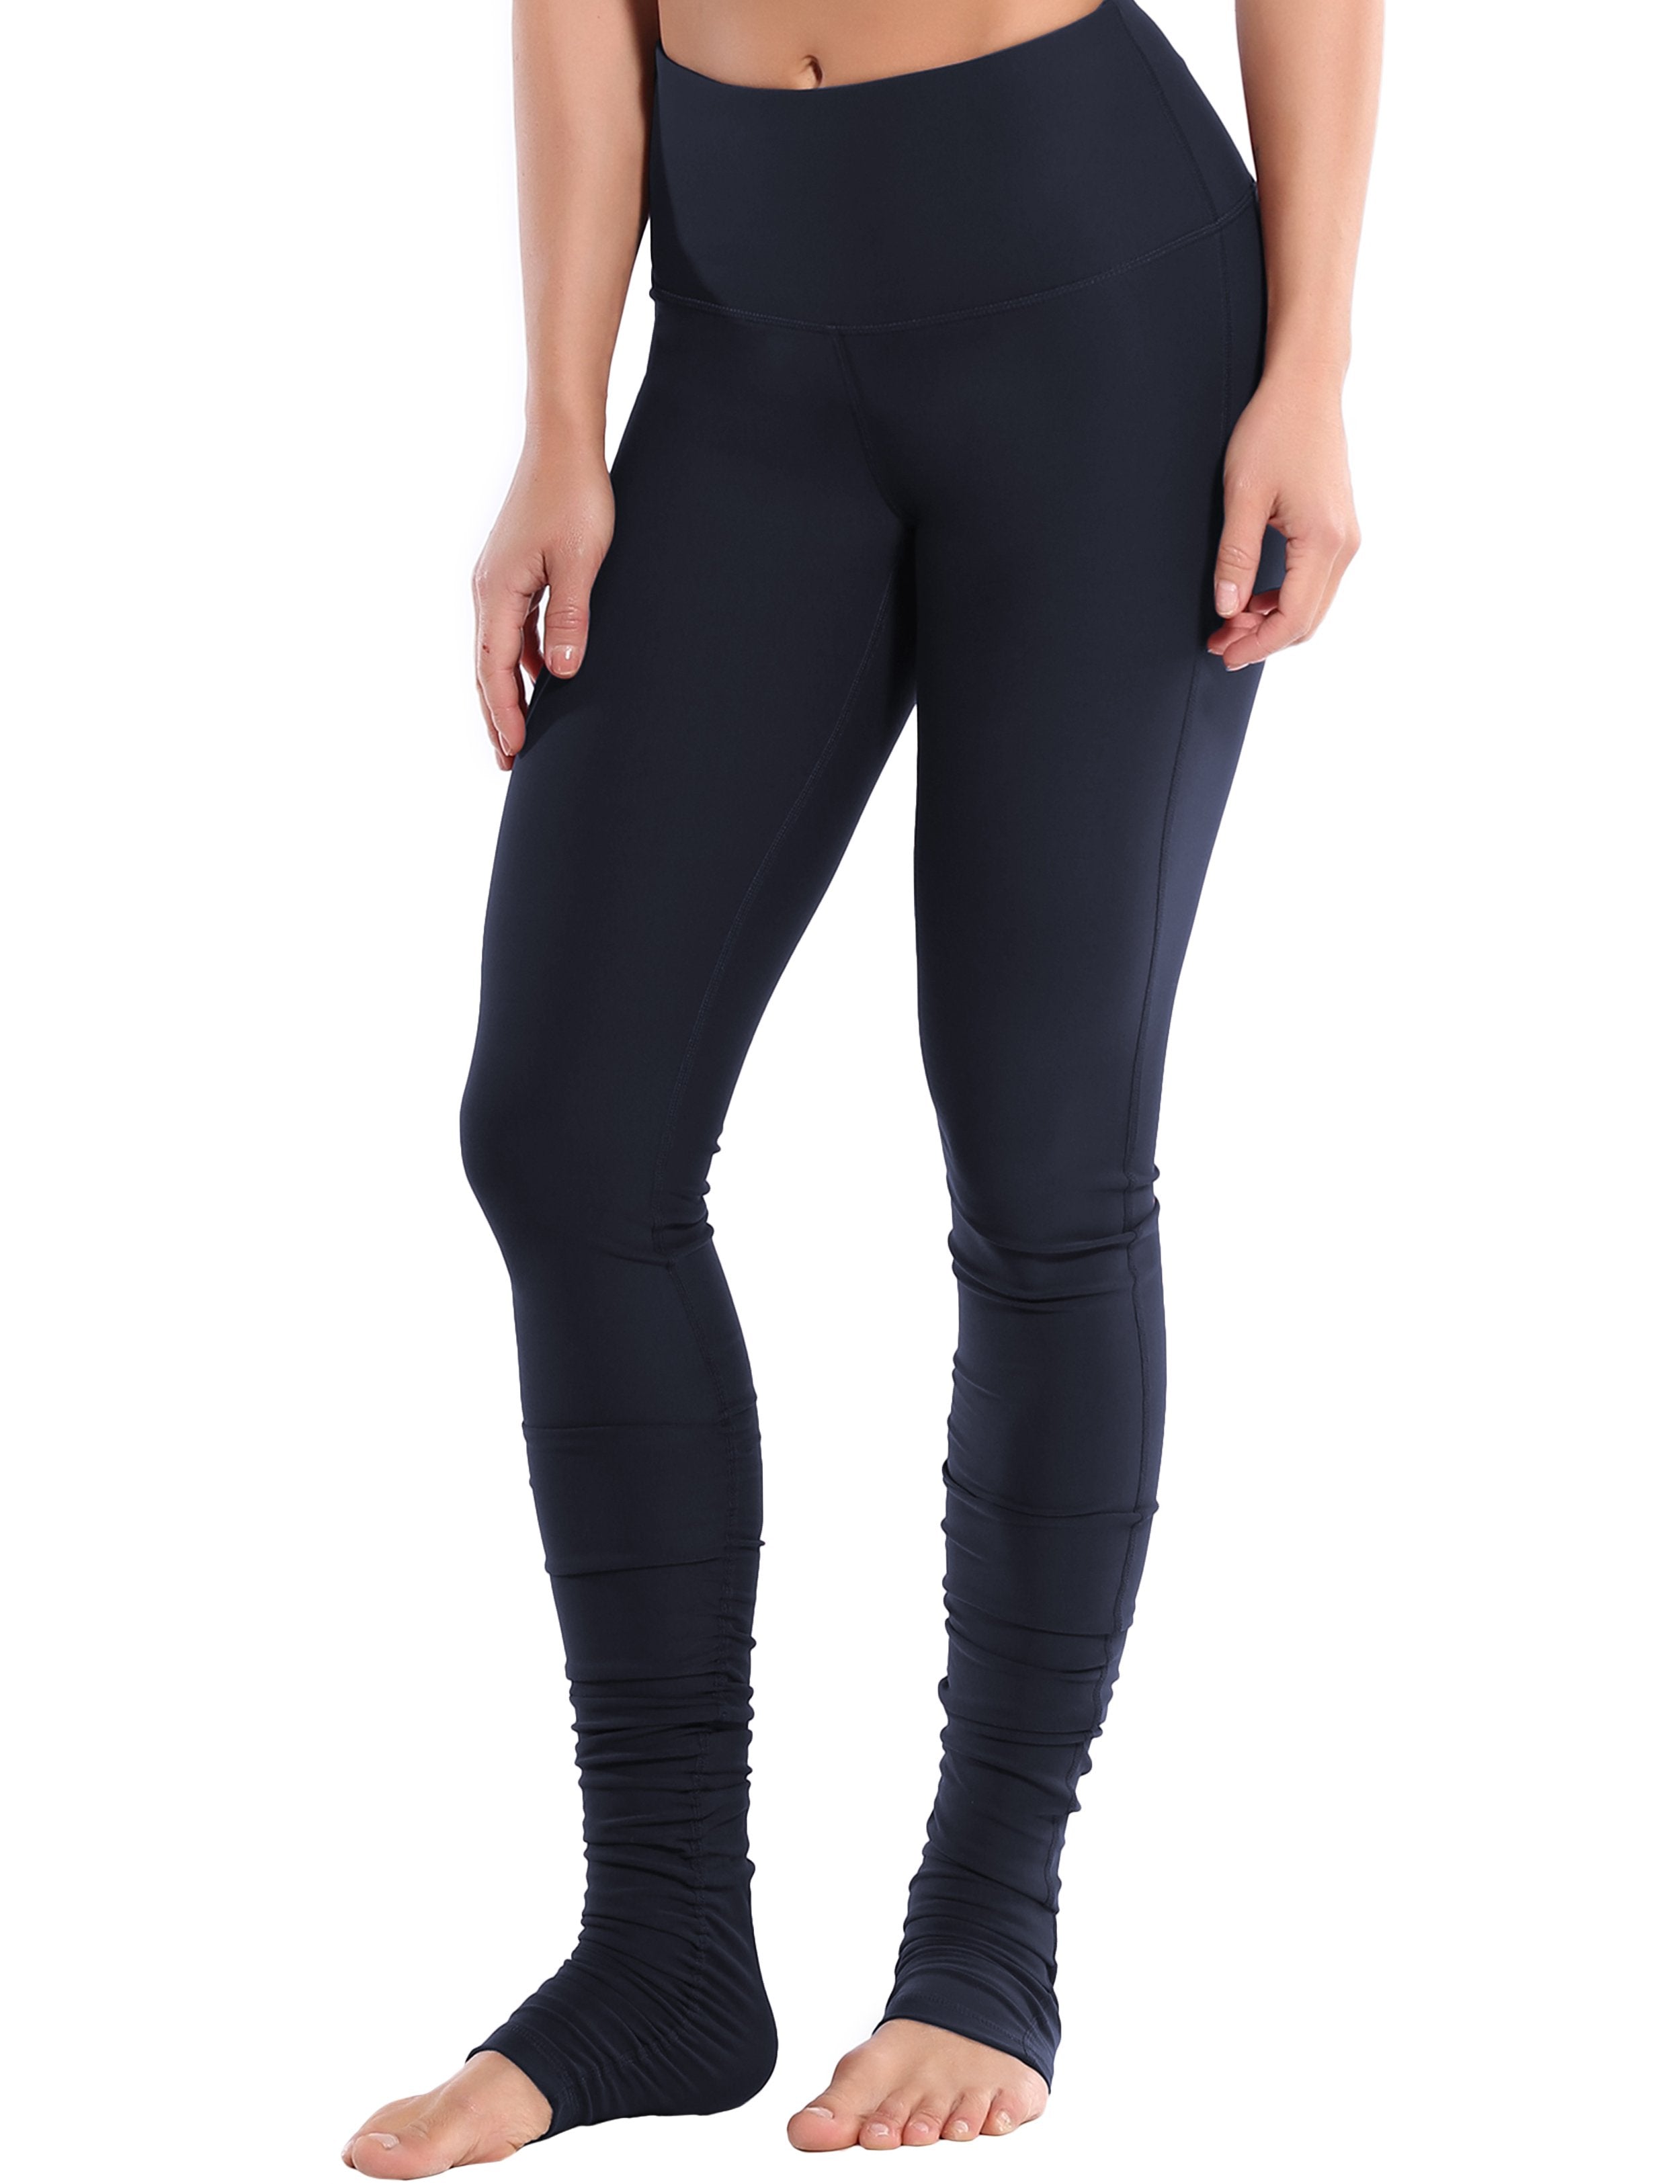 Over the Heel Yoga Pants darknavy Over the Heel Design 87%Nylon/13%Spandex Fabric doesn't attract lint easily 4-way stretch No see-through Moisture-wicking Tummy control